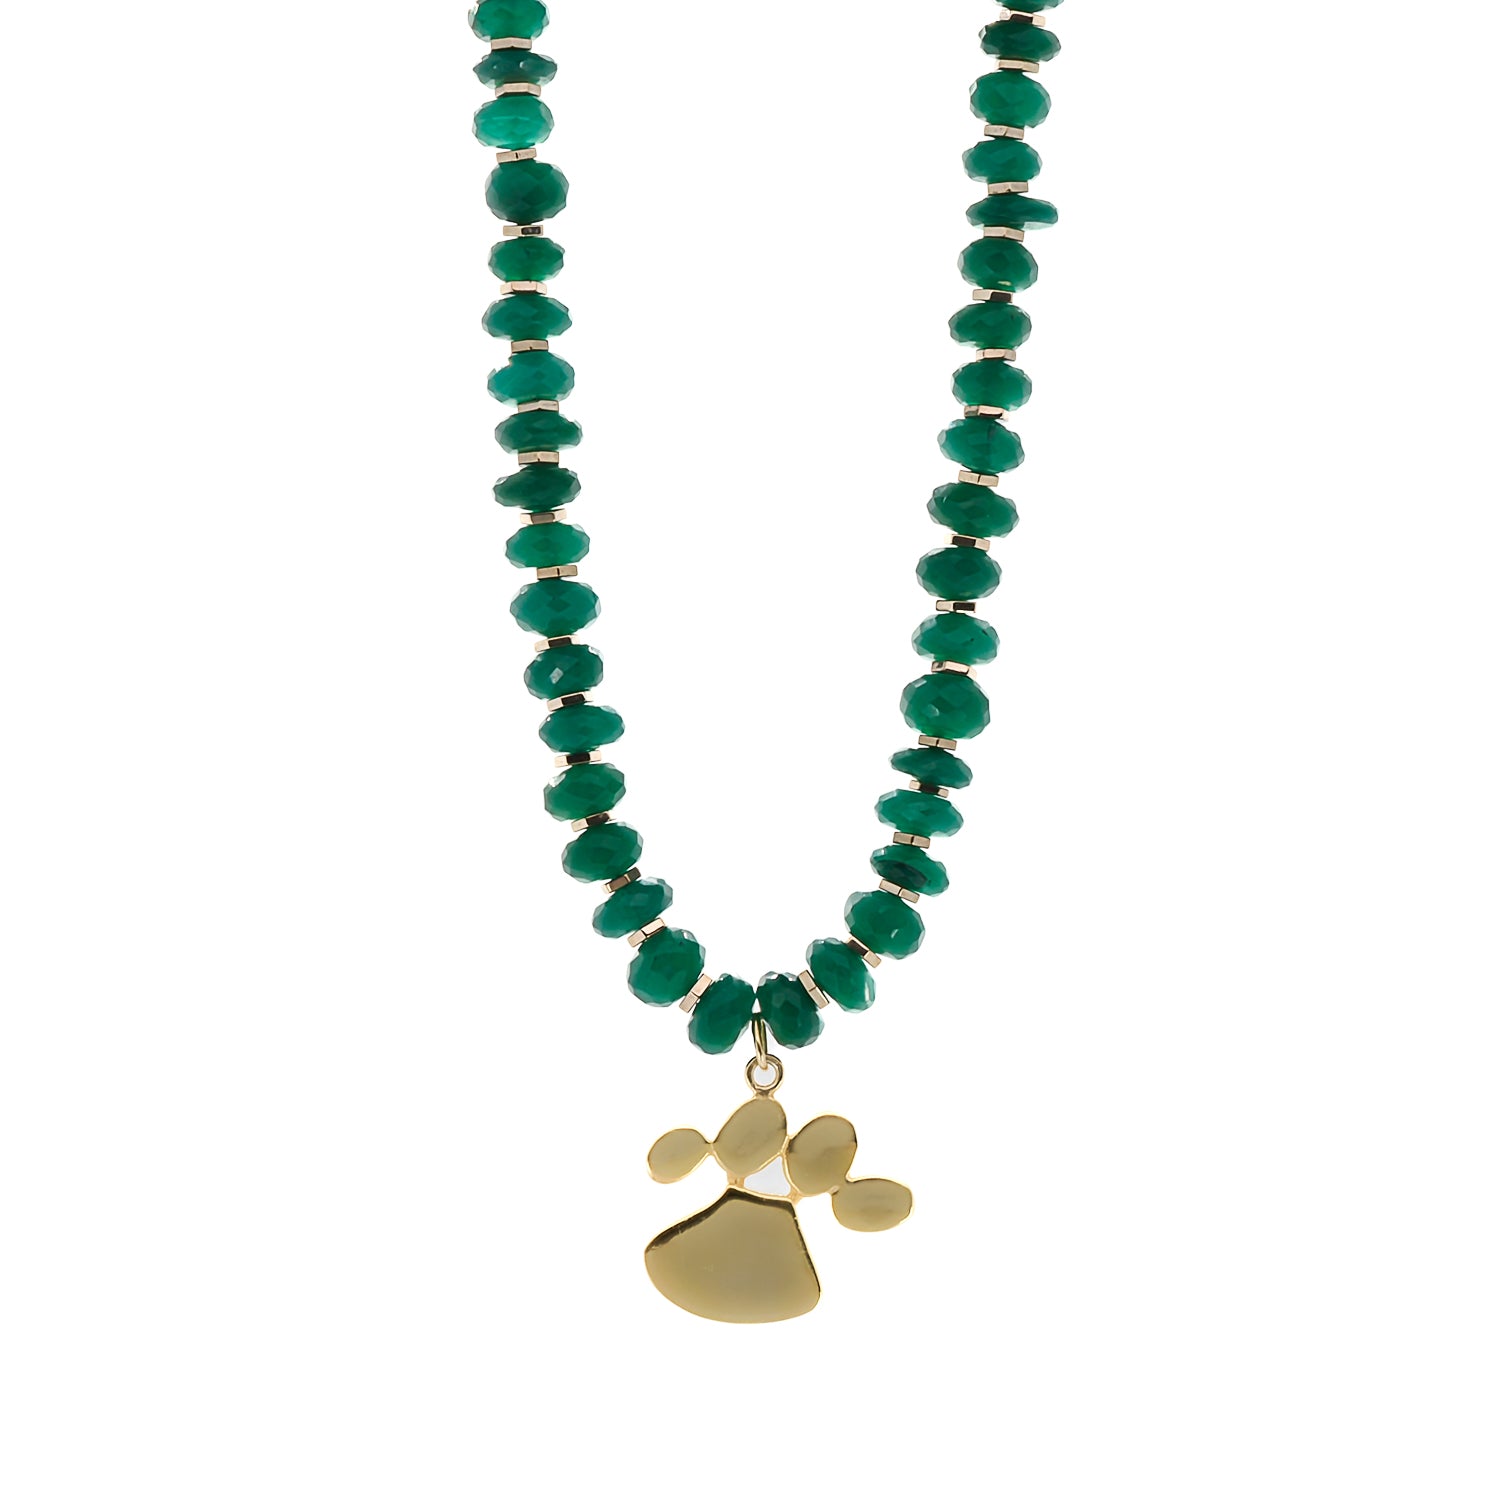 The Mother and Daughter Jade Necklace, a heartfelt symbol of love and connection, featuring a faceted green jade stone and a stunning mother and daughter pendant in sterling silver on 18k gold plating.